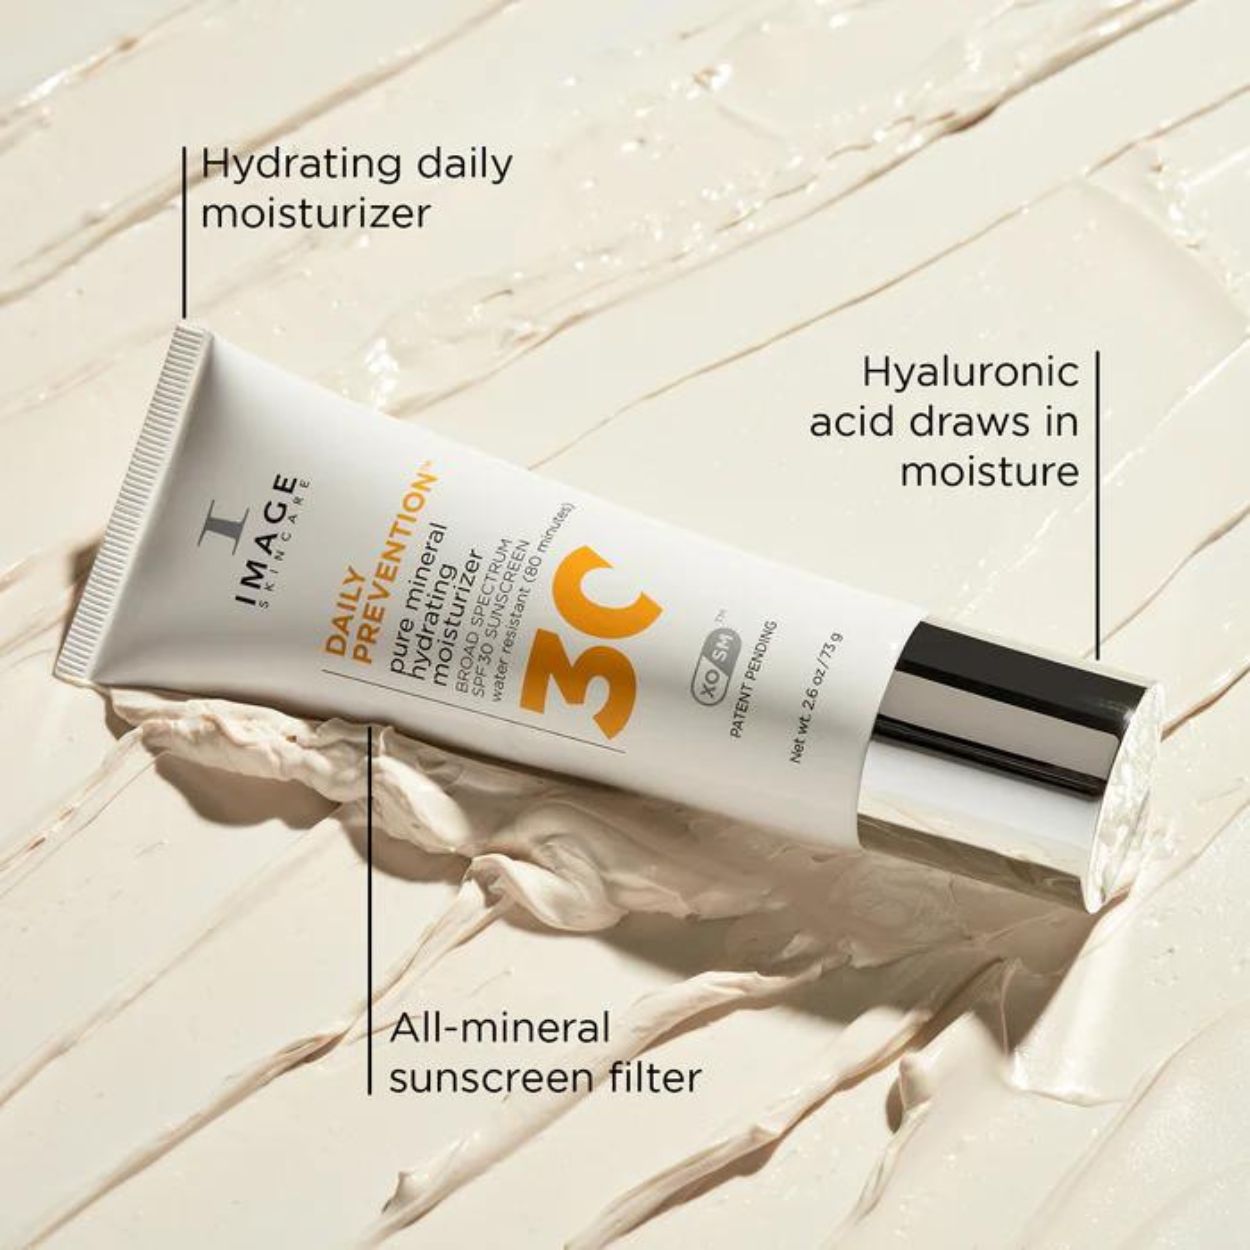 Daily Prevention Pure Mineral Hydrating Moisturizer SPF 30